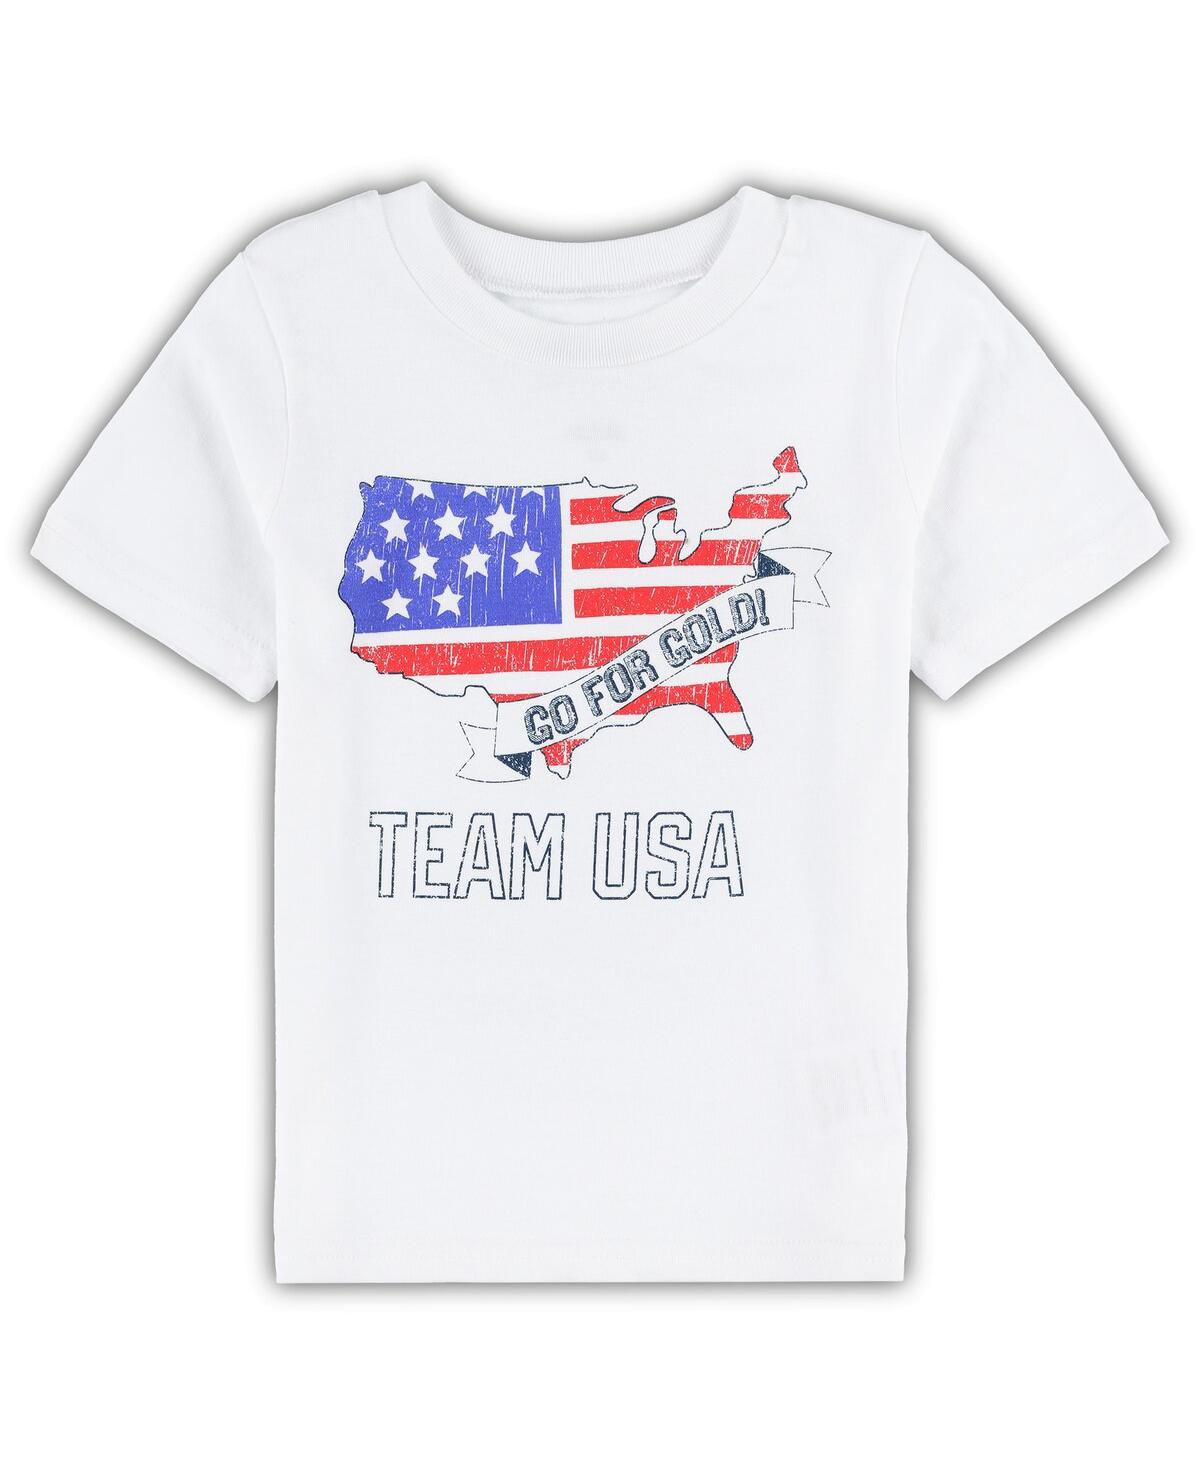 Outerstuff Kids' Toddler Boys And Girls White Team Usa Go For Gold T-shirt